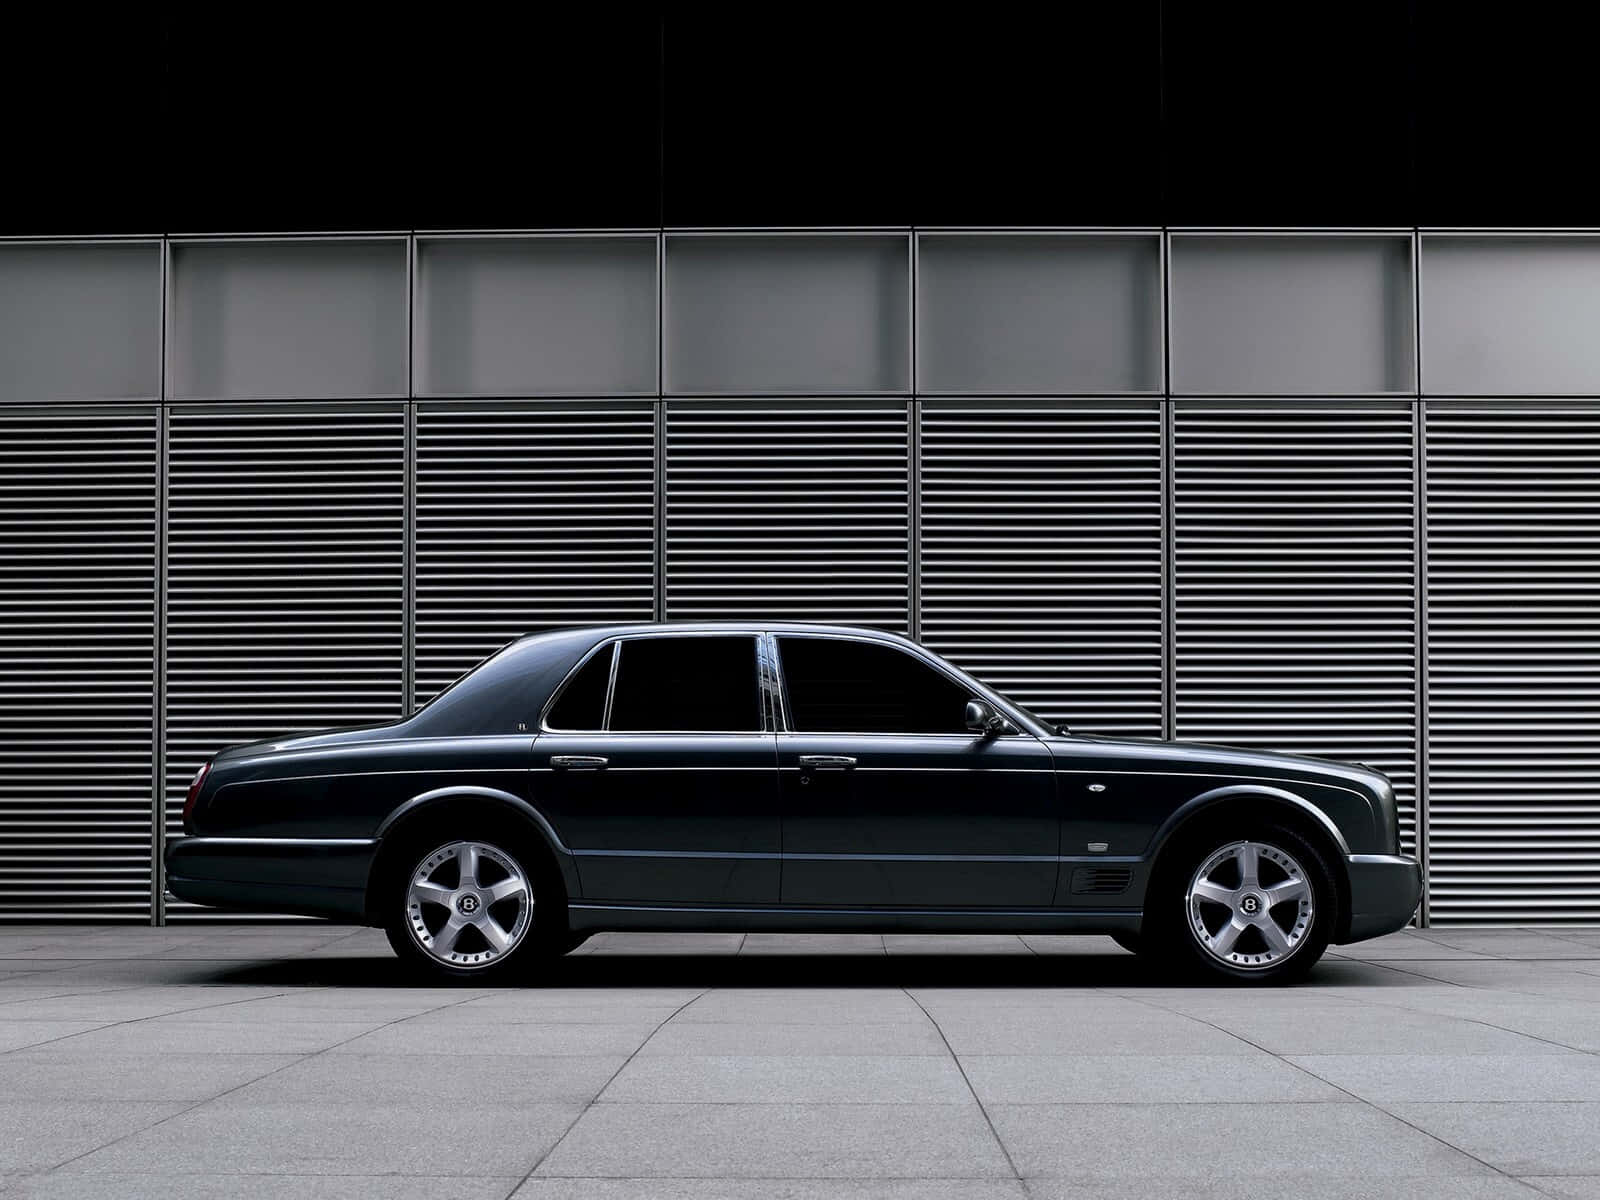 A luxurious Bentley Arnage parked in an elegant setting Wallpaper